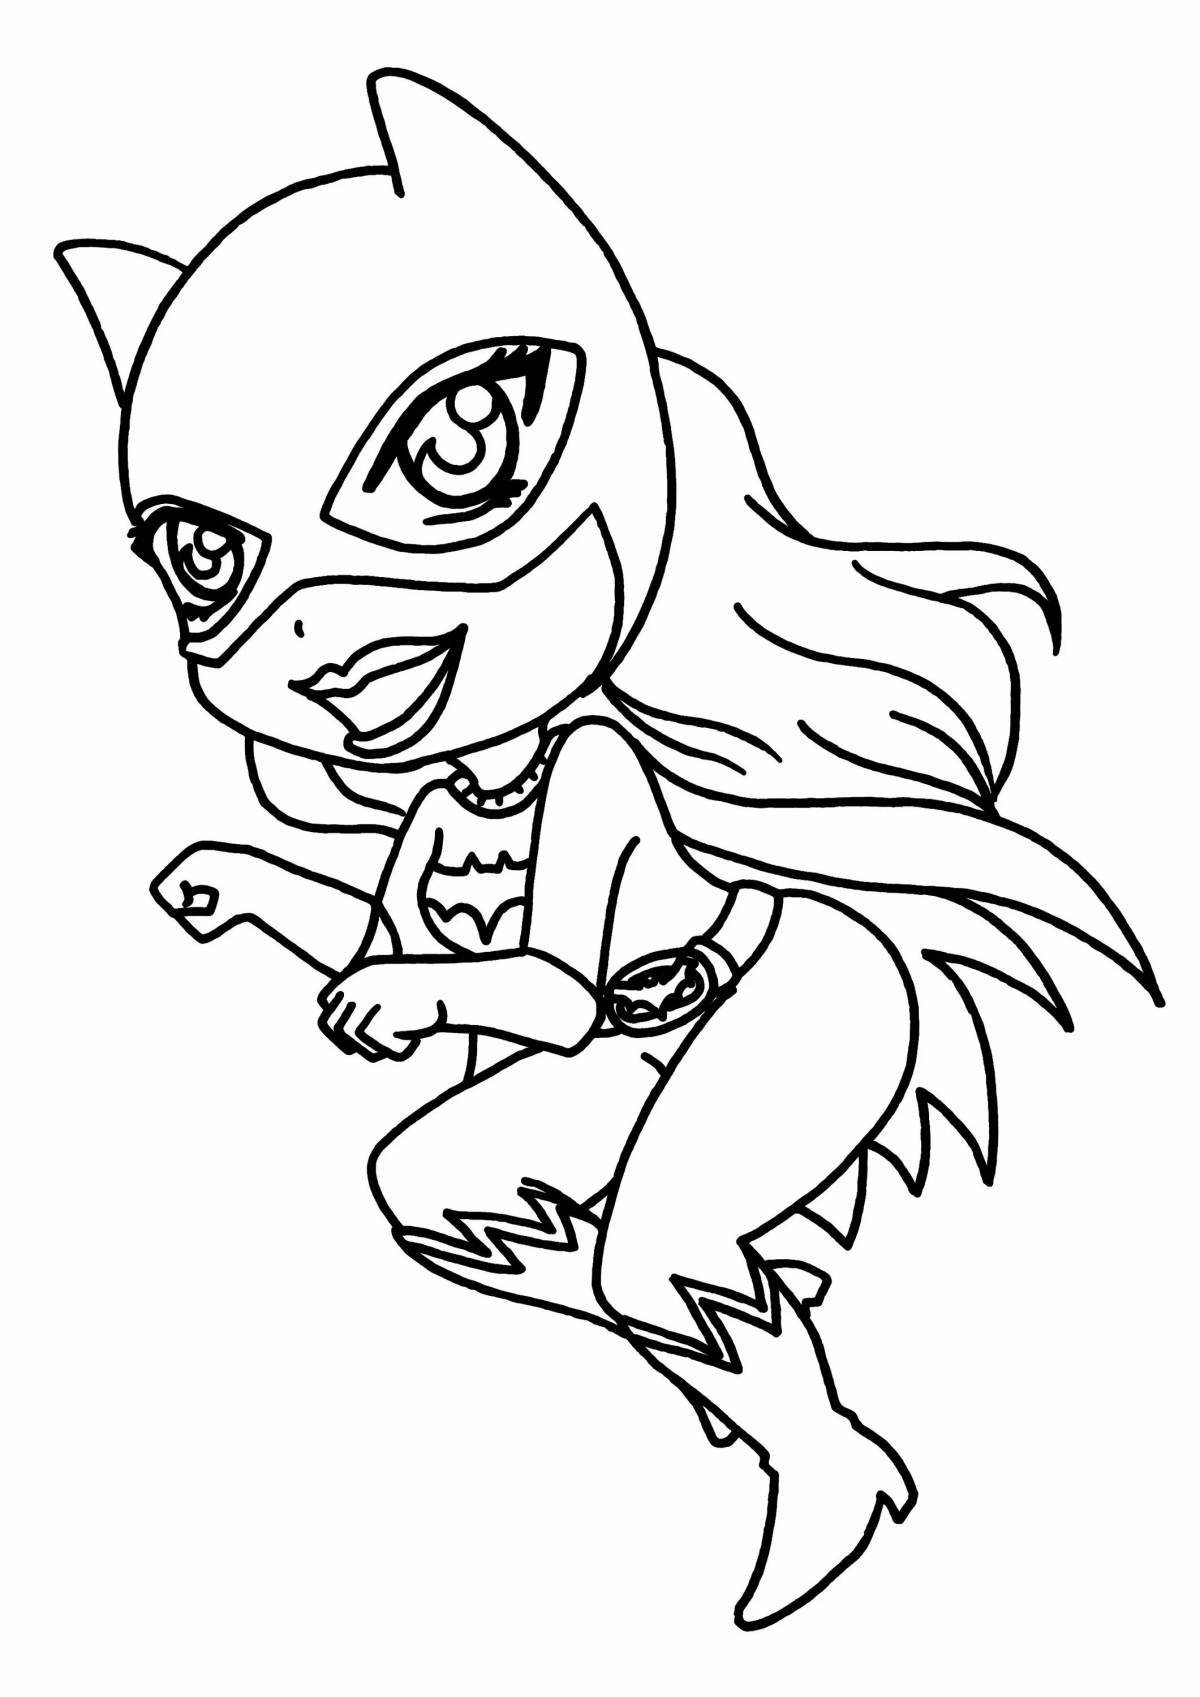 Outstanding super meow coloring book for kids